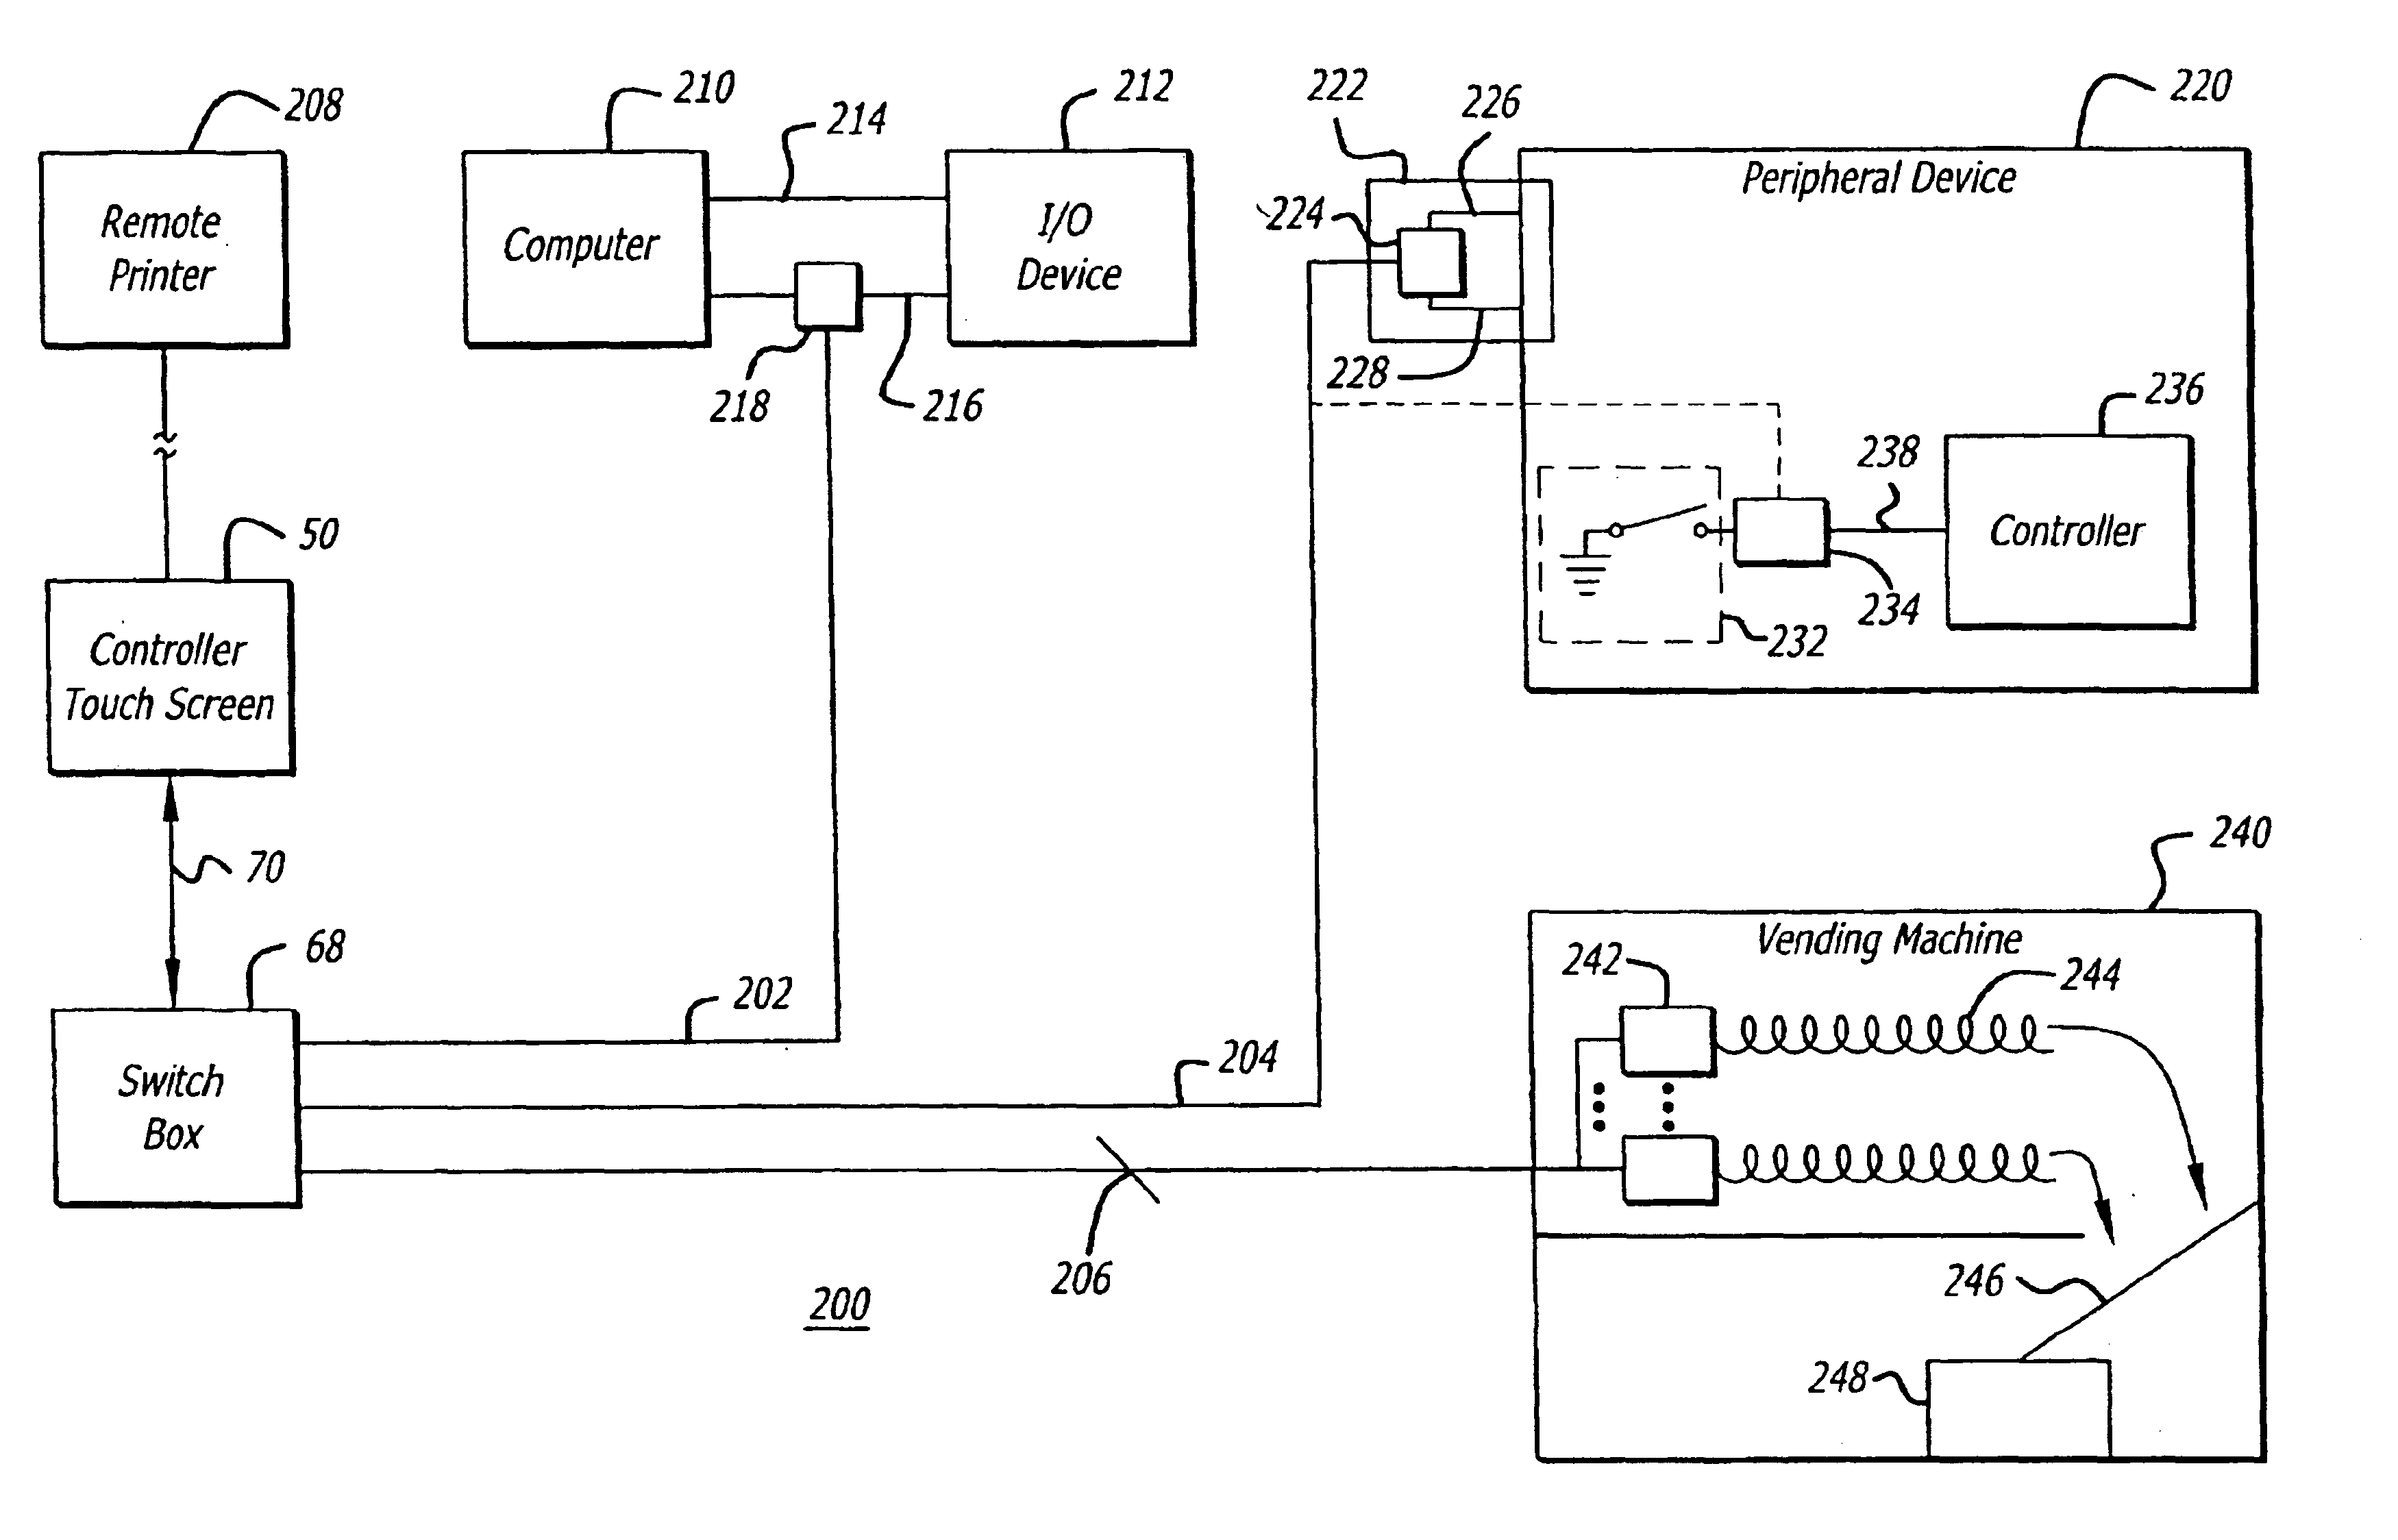 Method and apparatus for vending machine controller configured to monitor and analyze power profiles for plurality of motor coils to determine condition of vending machine